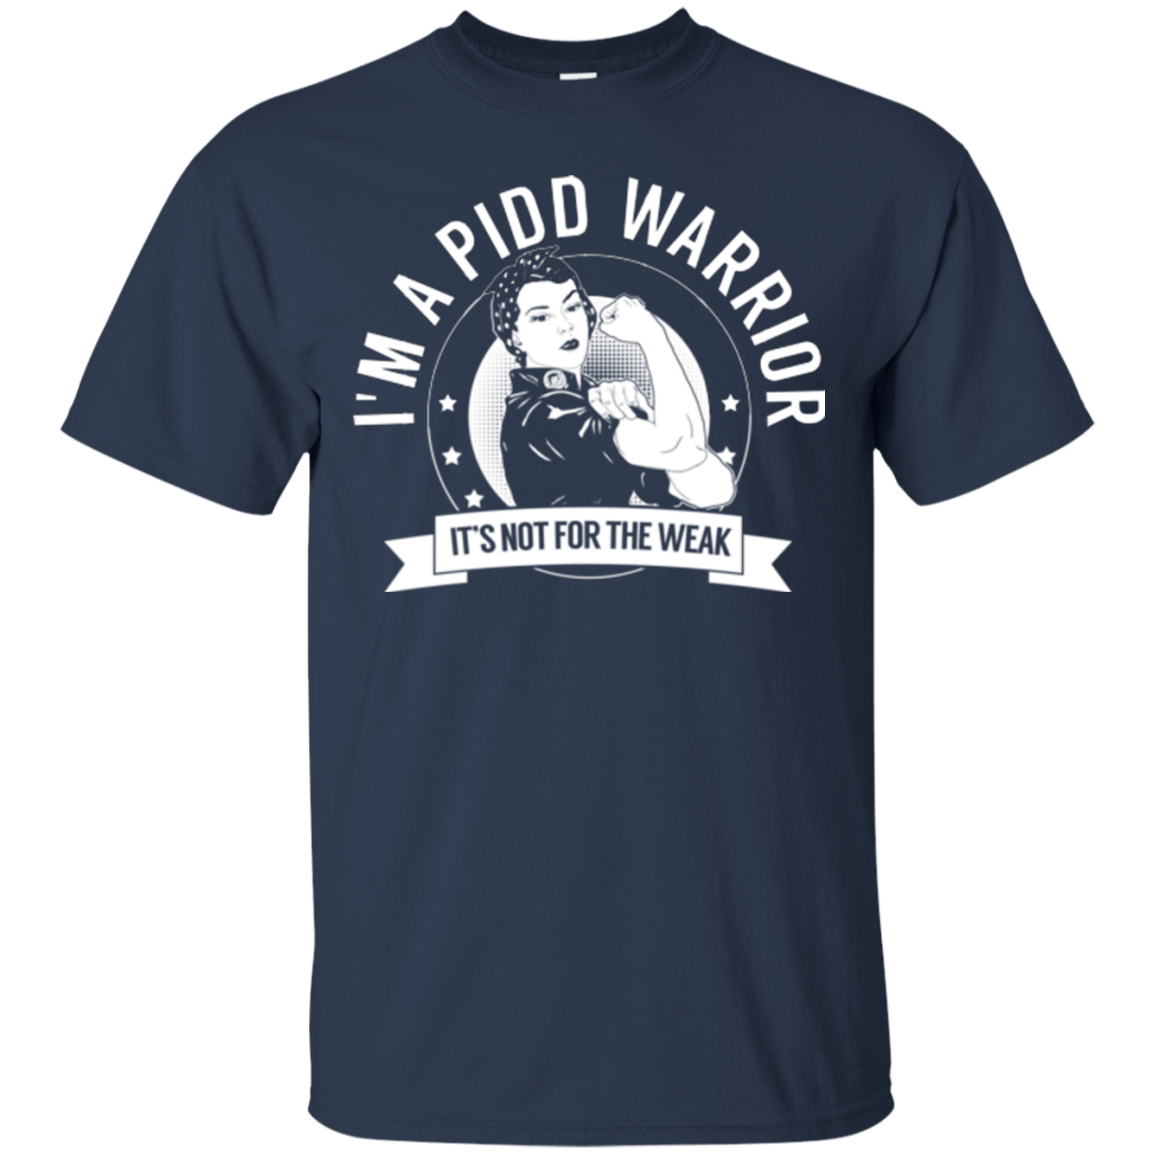 Primary Immunodeficiency Diseases - PIDD Warrior Not For The Weak Cotton T-Shirt - The Unchargeables